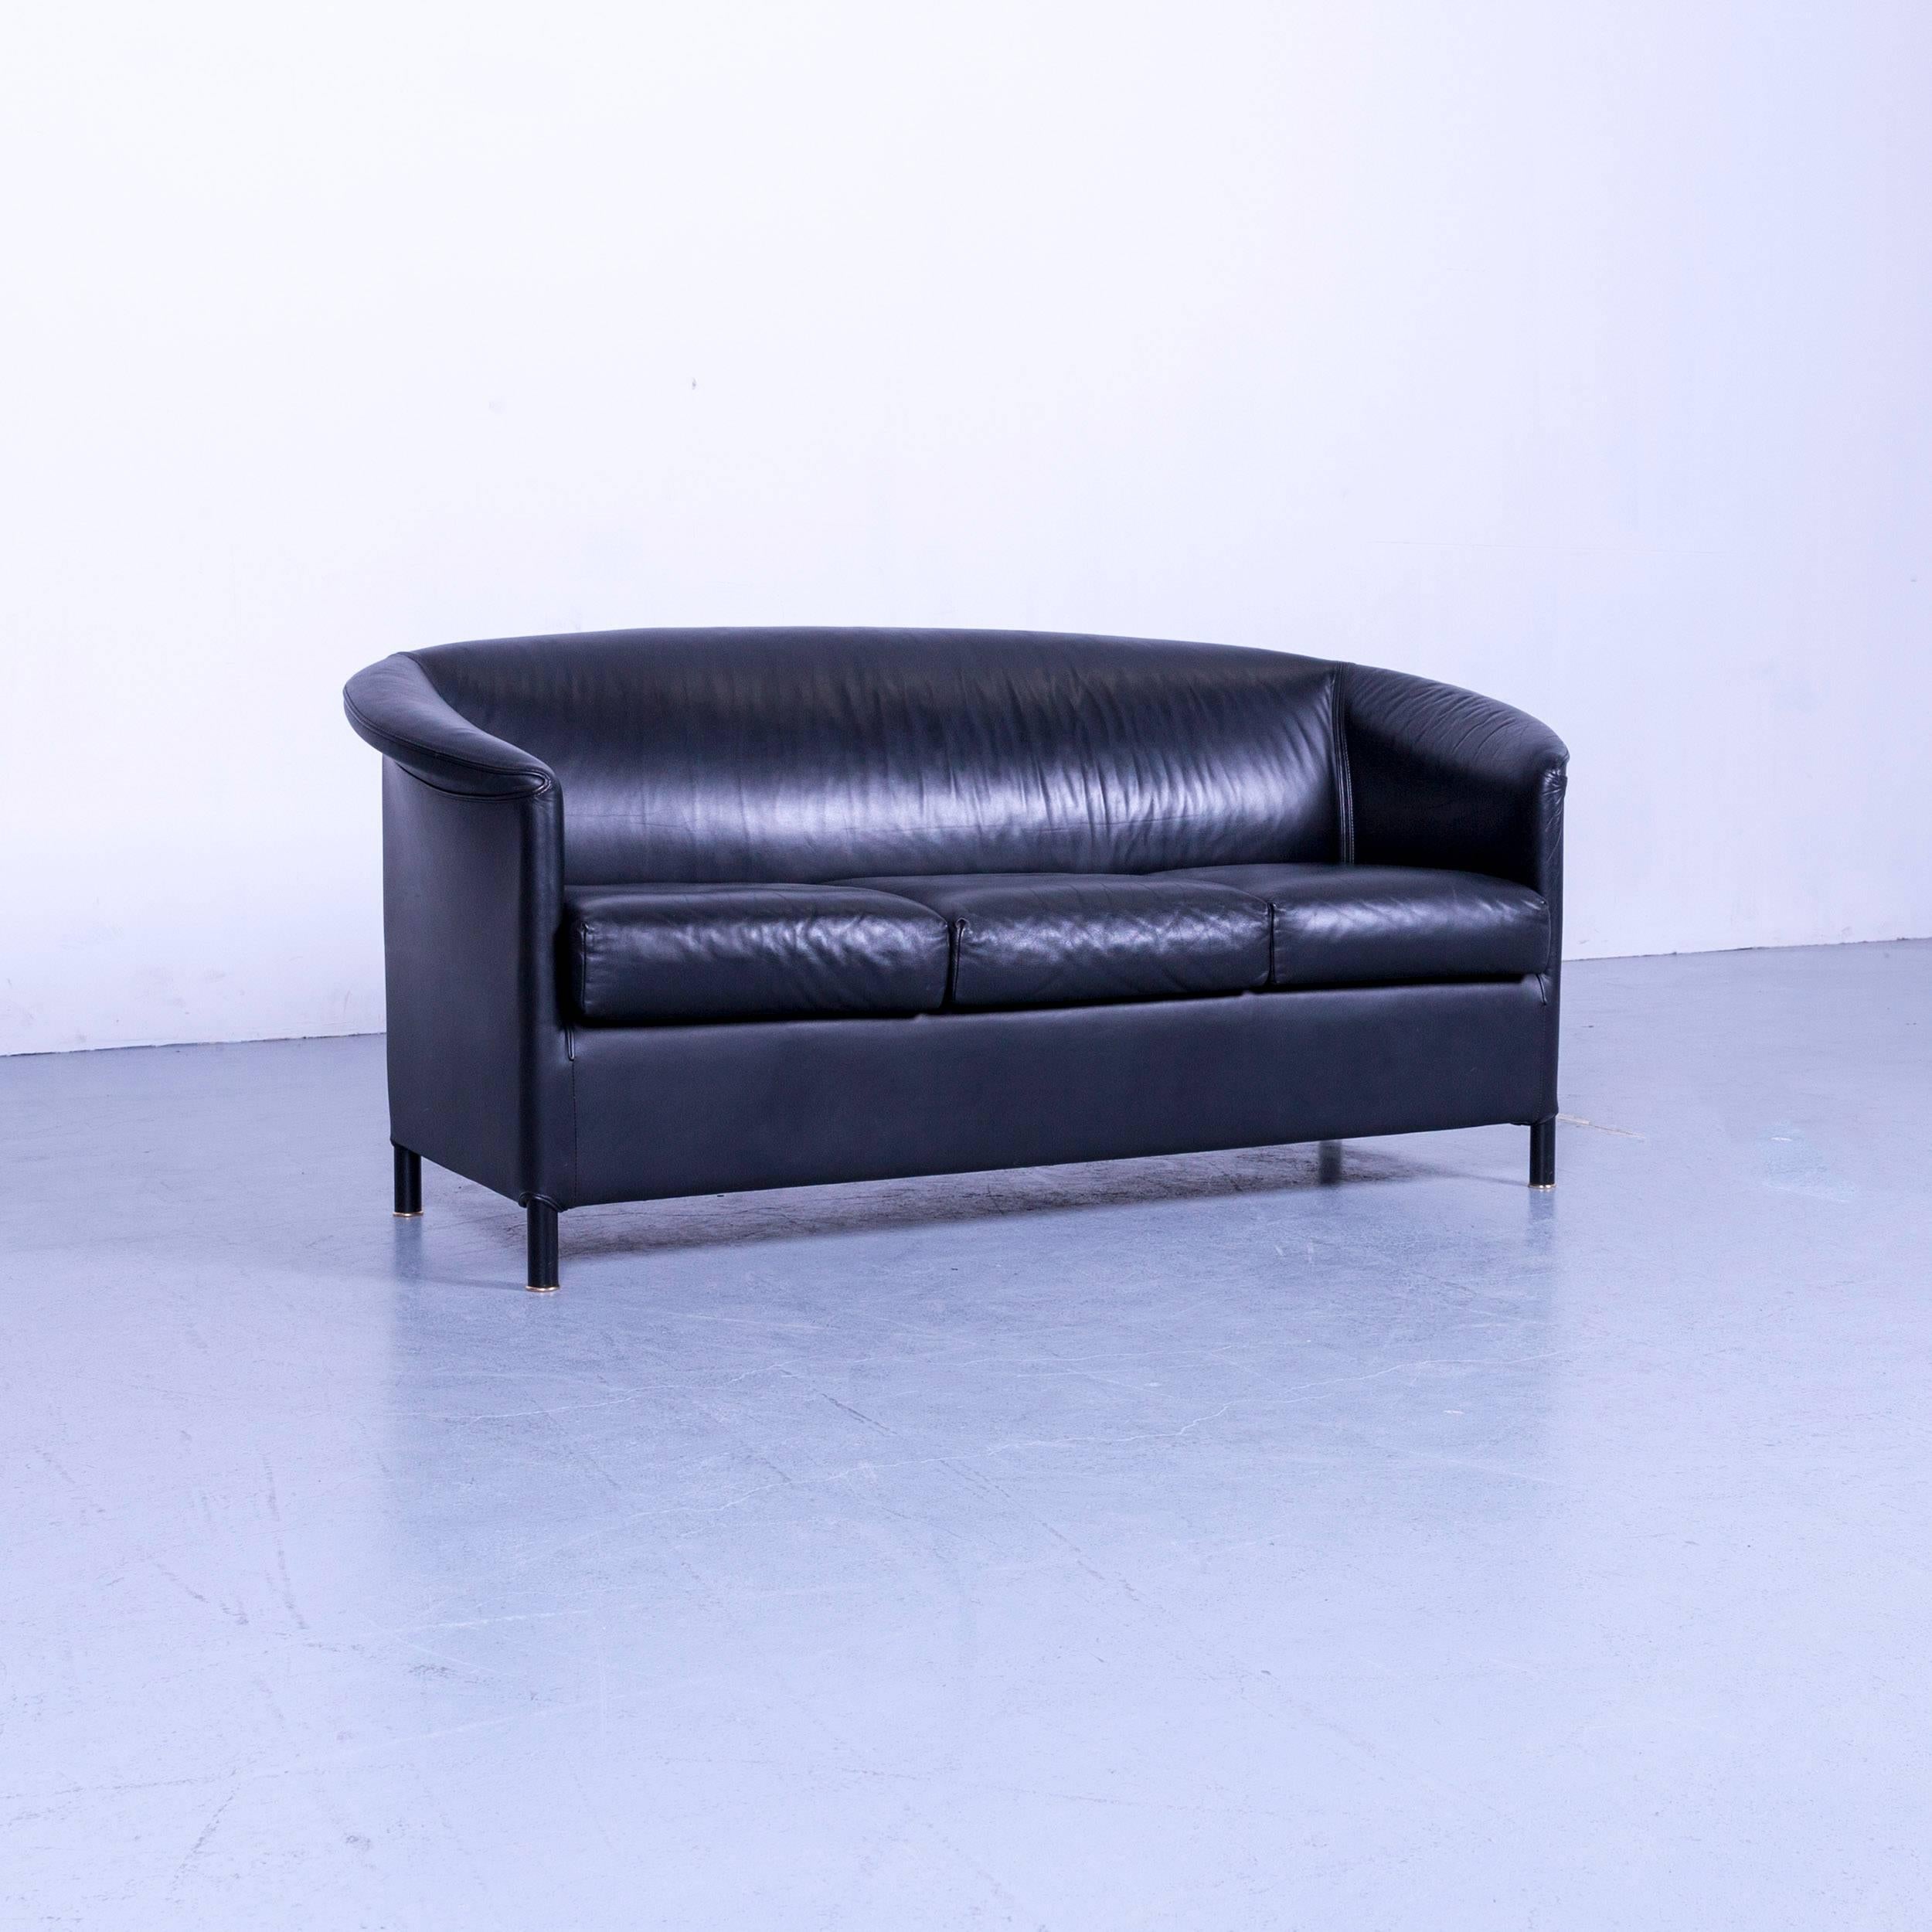 We offer delivery options to most destinations on earth. Find our shipping quotes at the bottom of this page in the shipping section.

An Wittmann Aura Designer Three-Seater Sofa Black Leather Couch

Shipping:

An on point shipping process is our